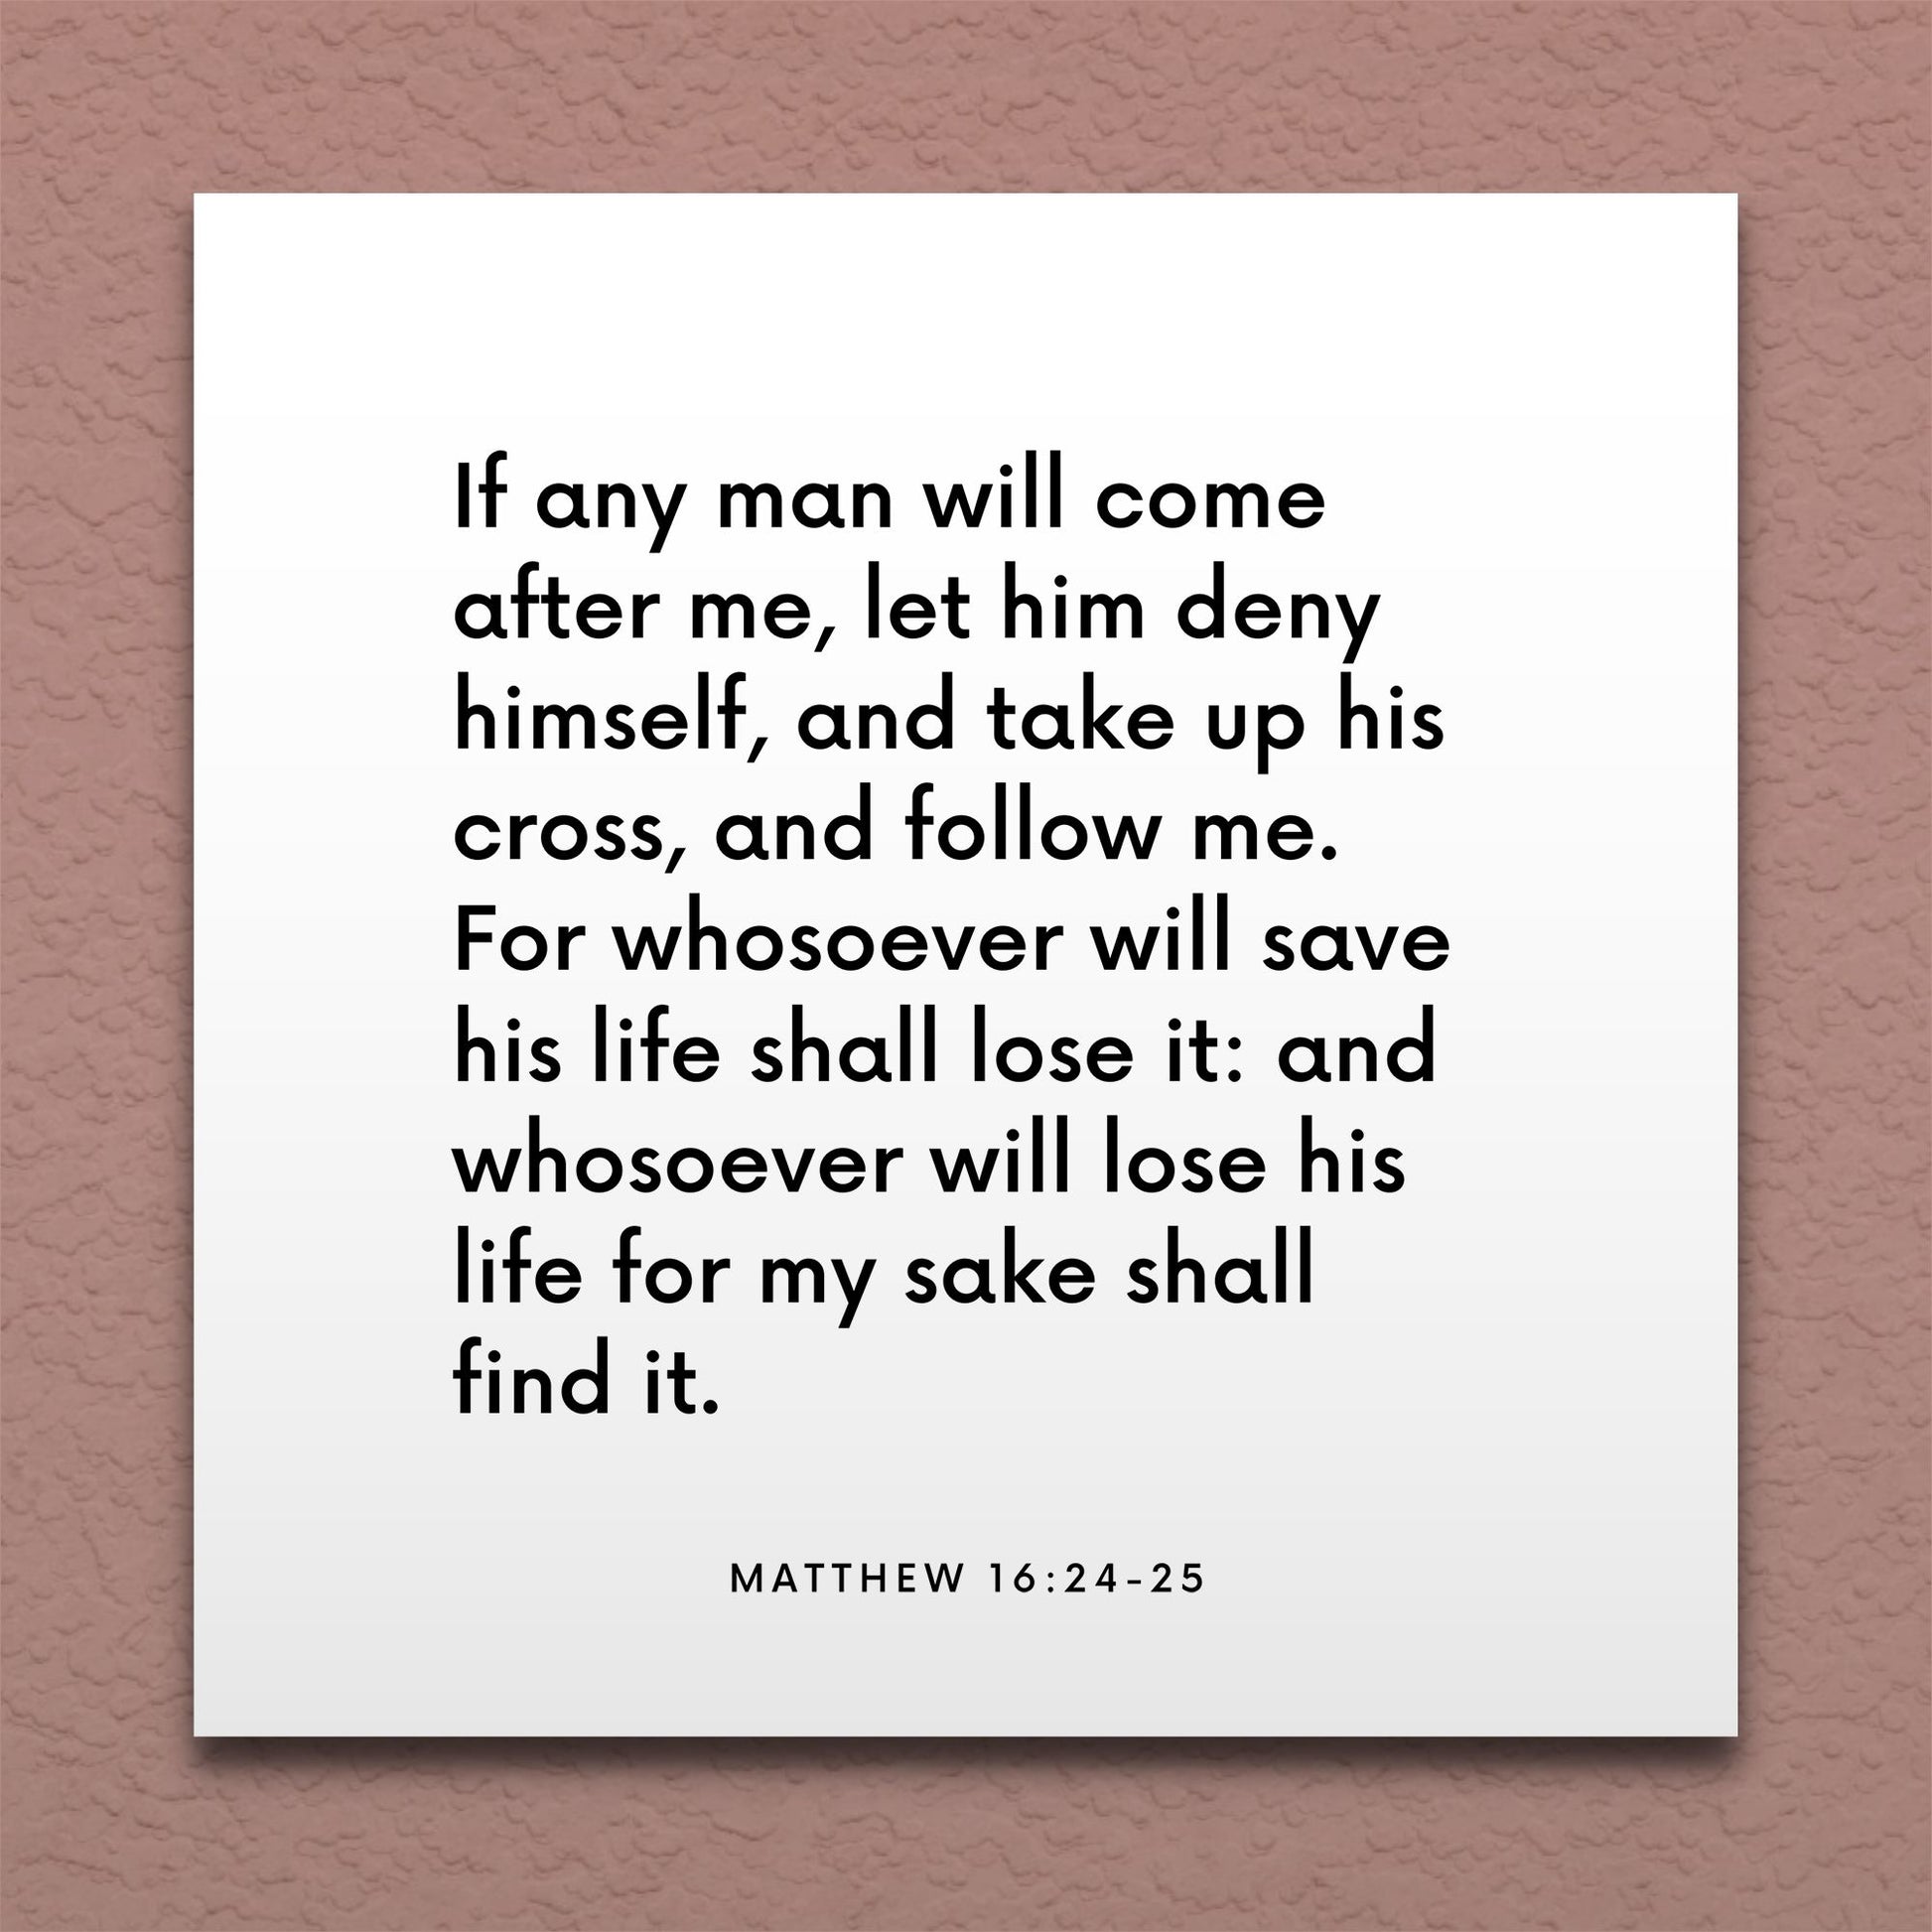 Wall-mounted scripture tile for Matthew 16:24-25 - "Whosoever will lose his life for my sake shall find it"